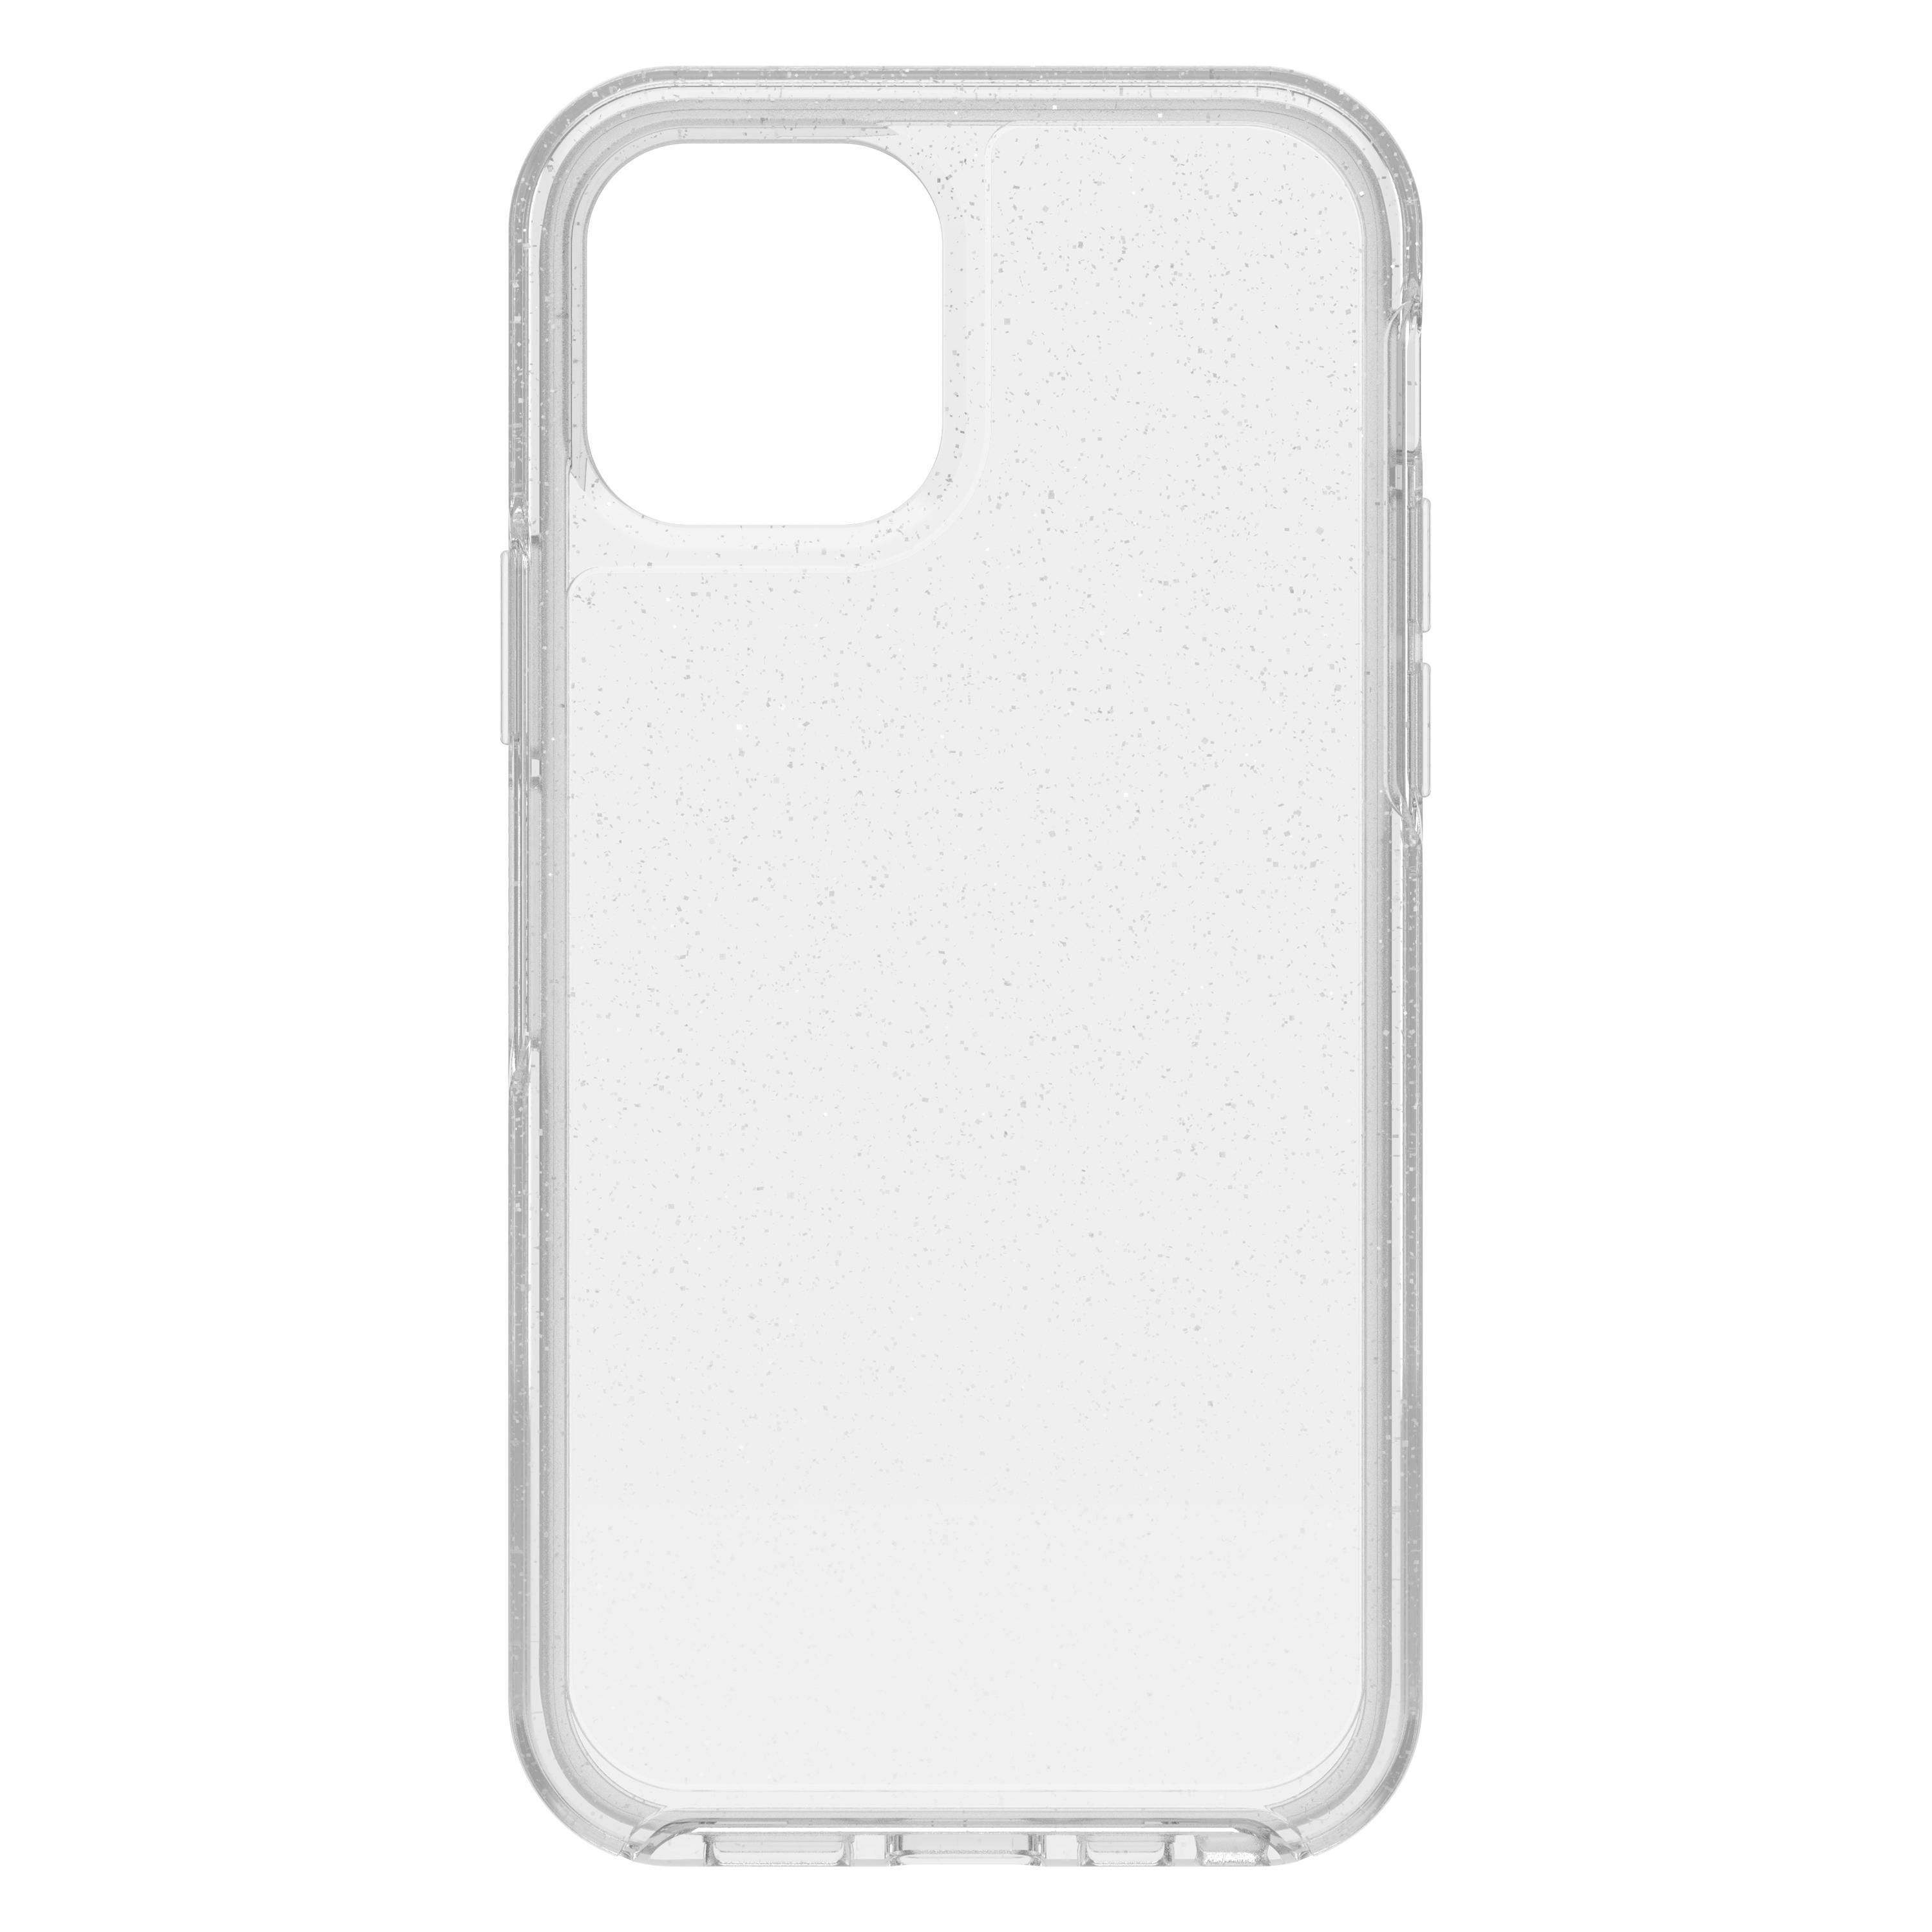 , Pro, iPhone Apple, Symmetry Clear 12, Backcover, iPhone OTTERBOX 12 Transparent/Glitzer